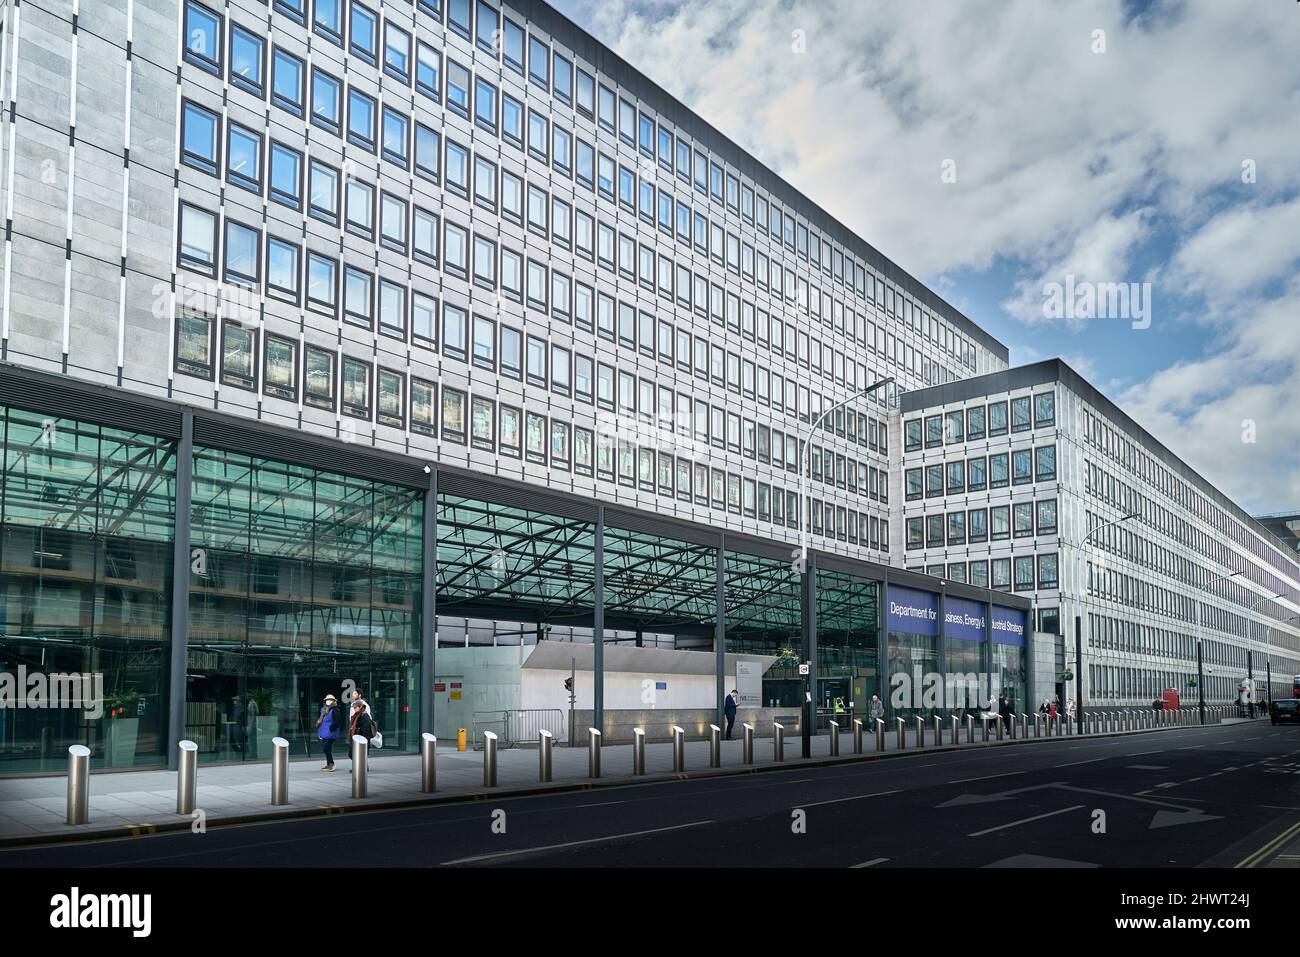 The british government's department for business, energy & industrial stragey building, London, England. Stock Photo